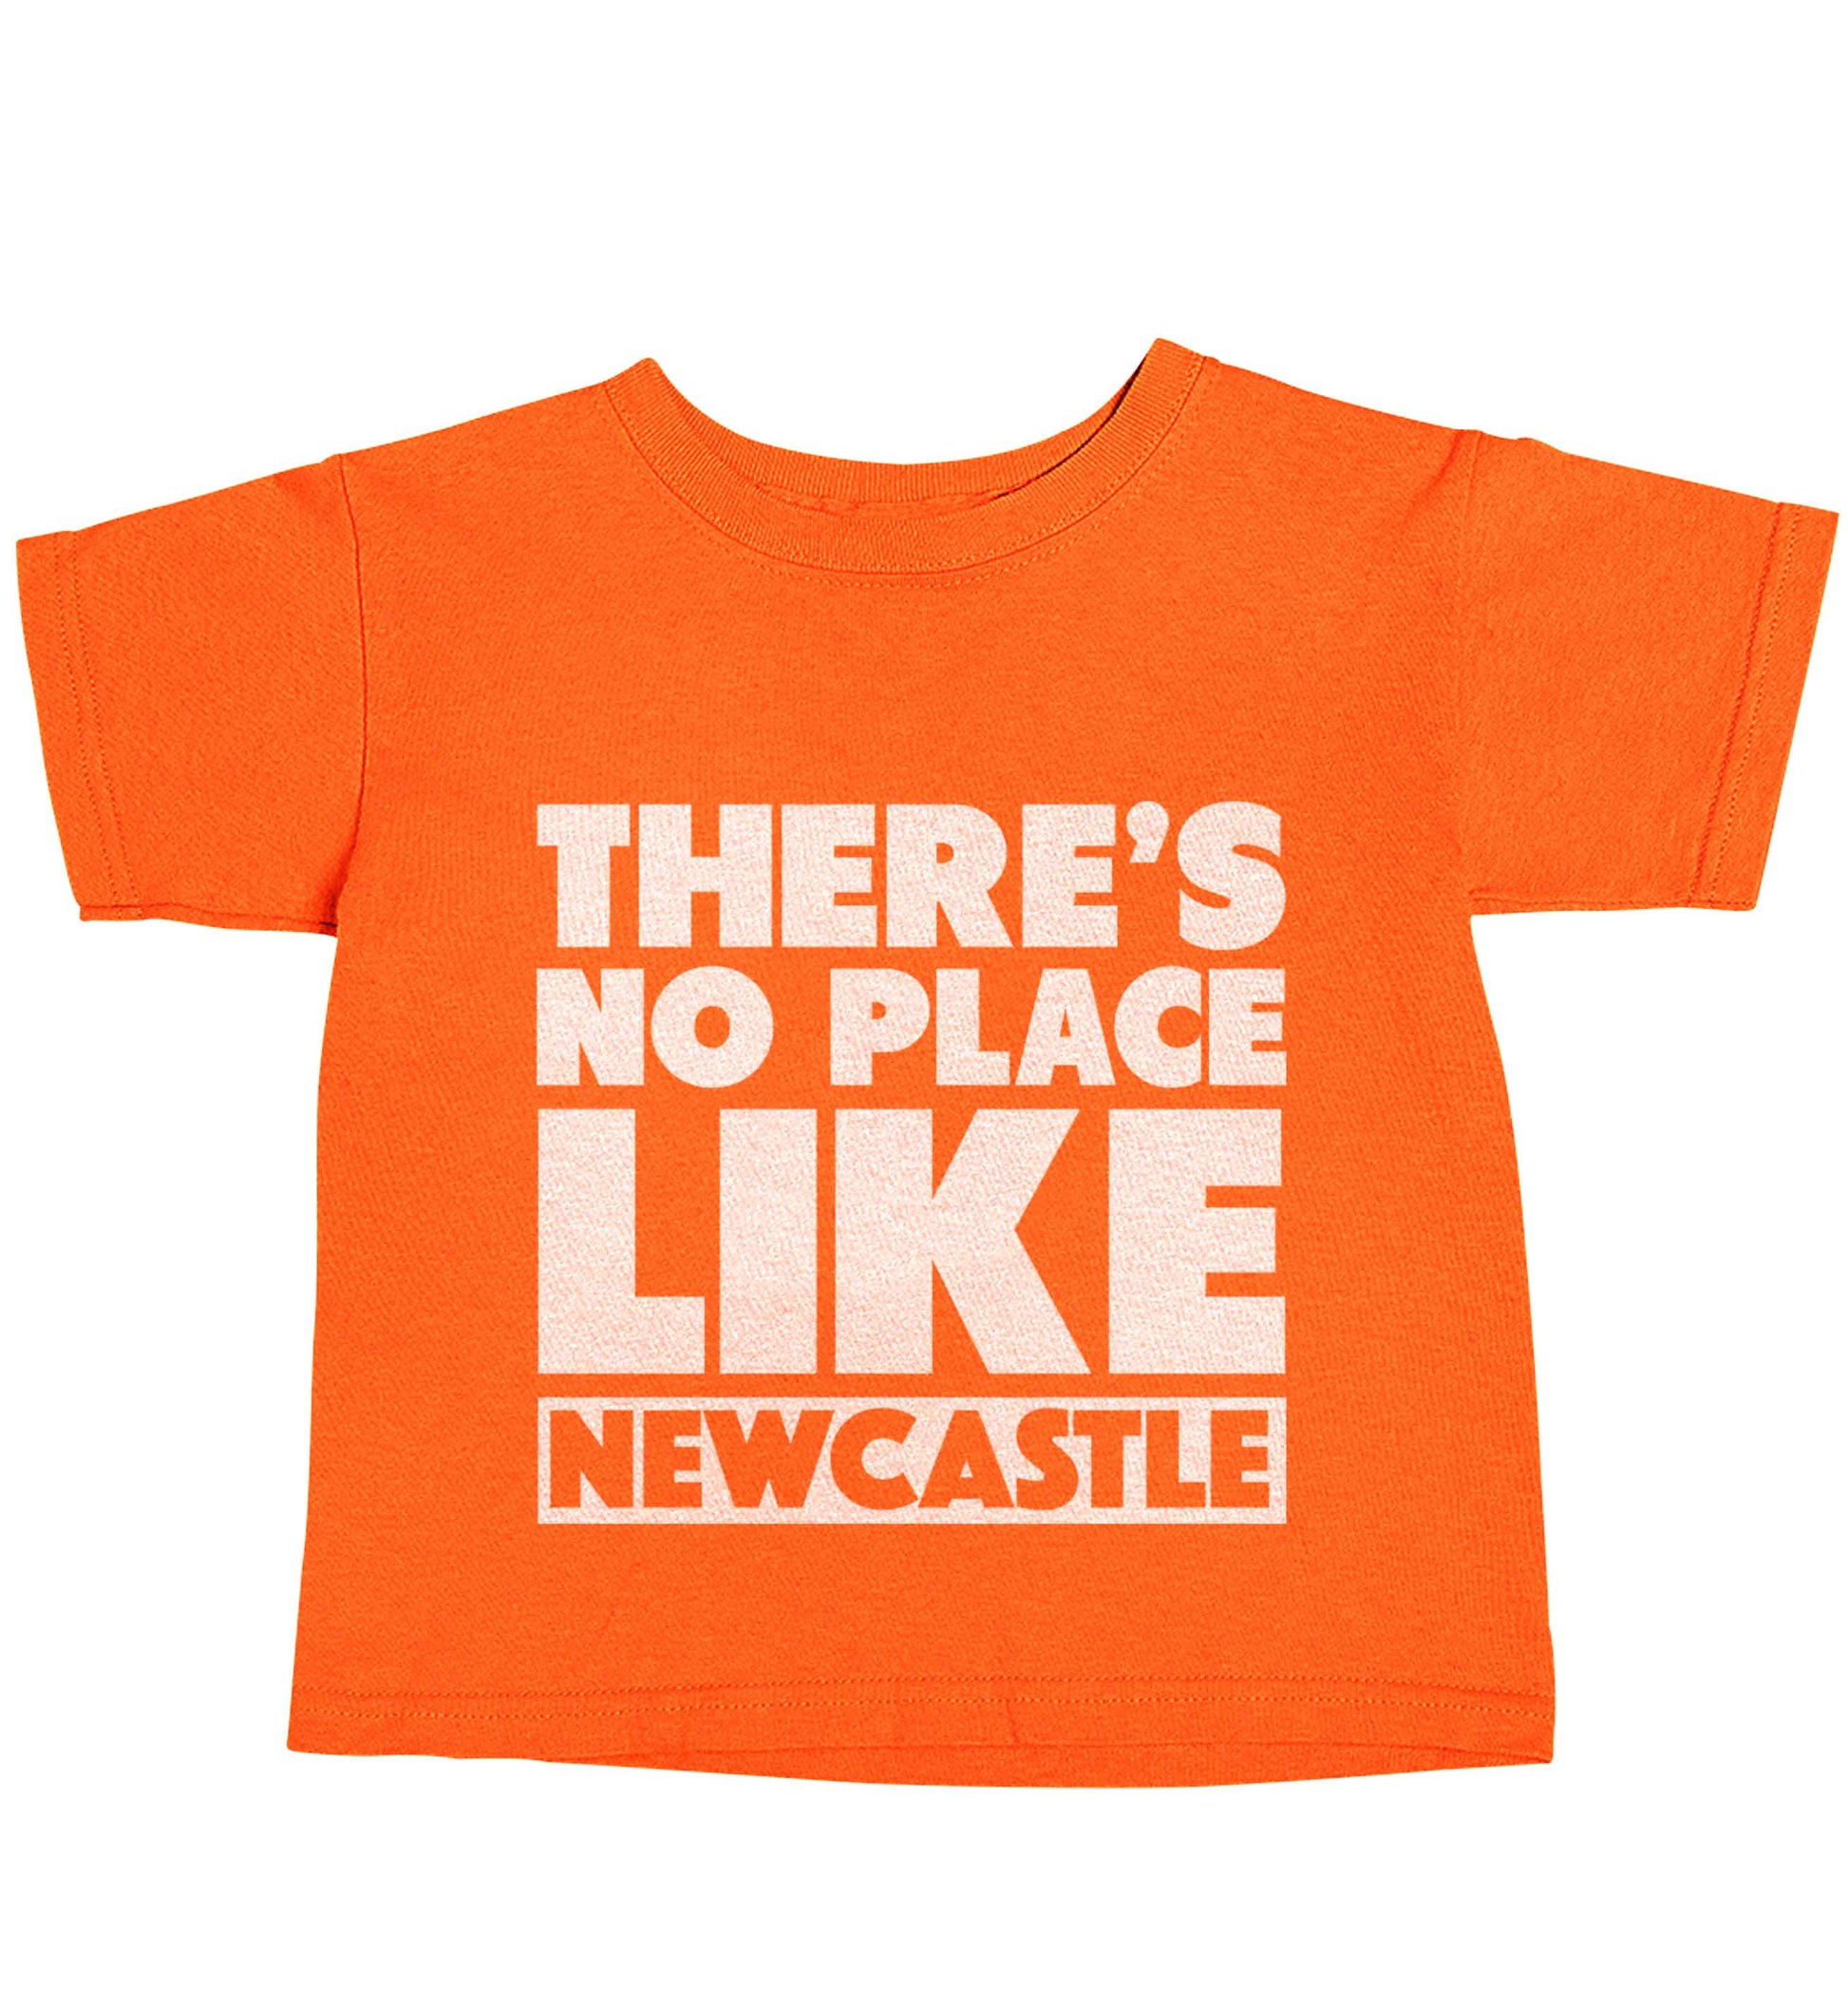 There's no place like Newcastle orange baby toddler Tshirt 2 Years